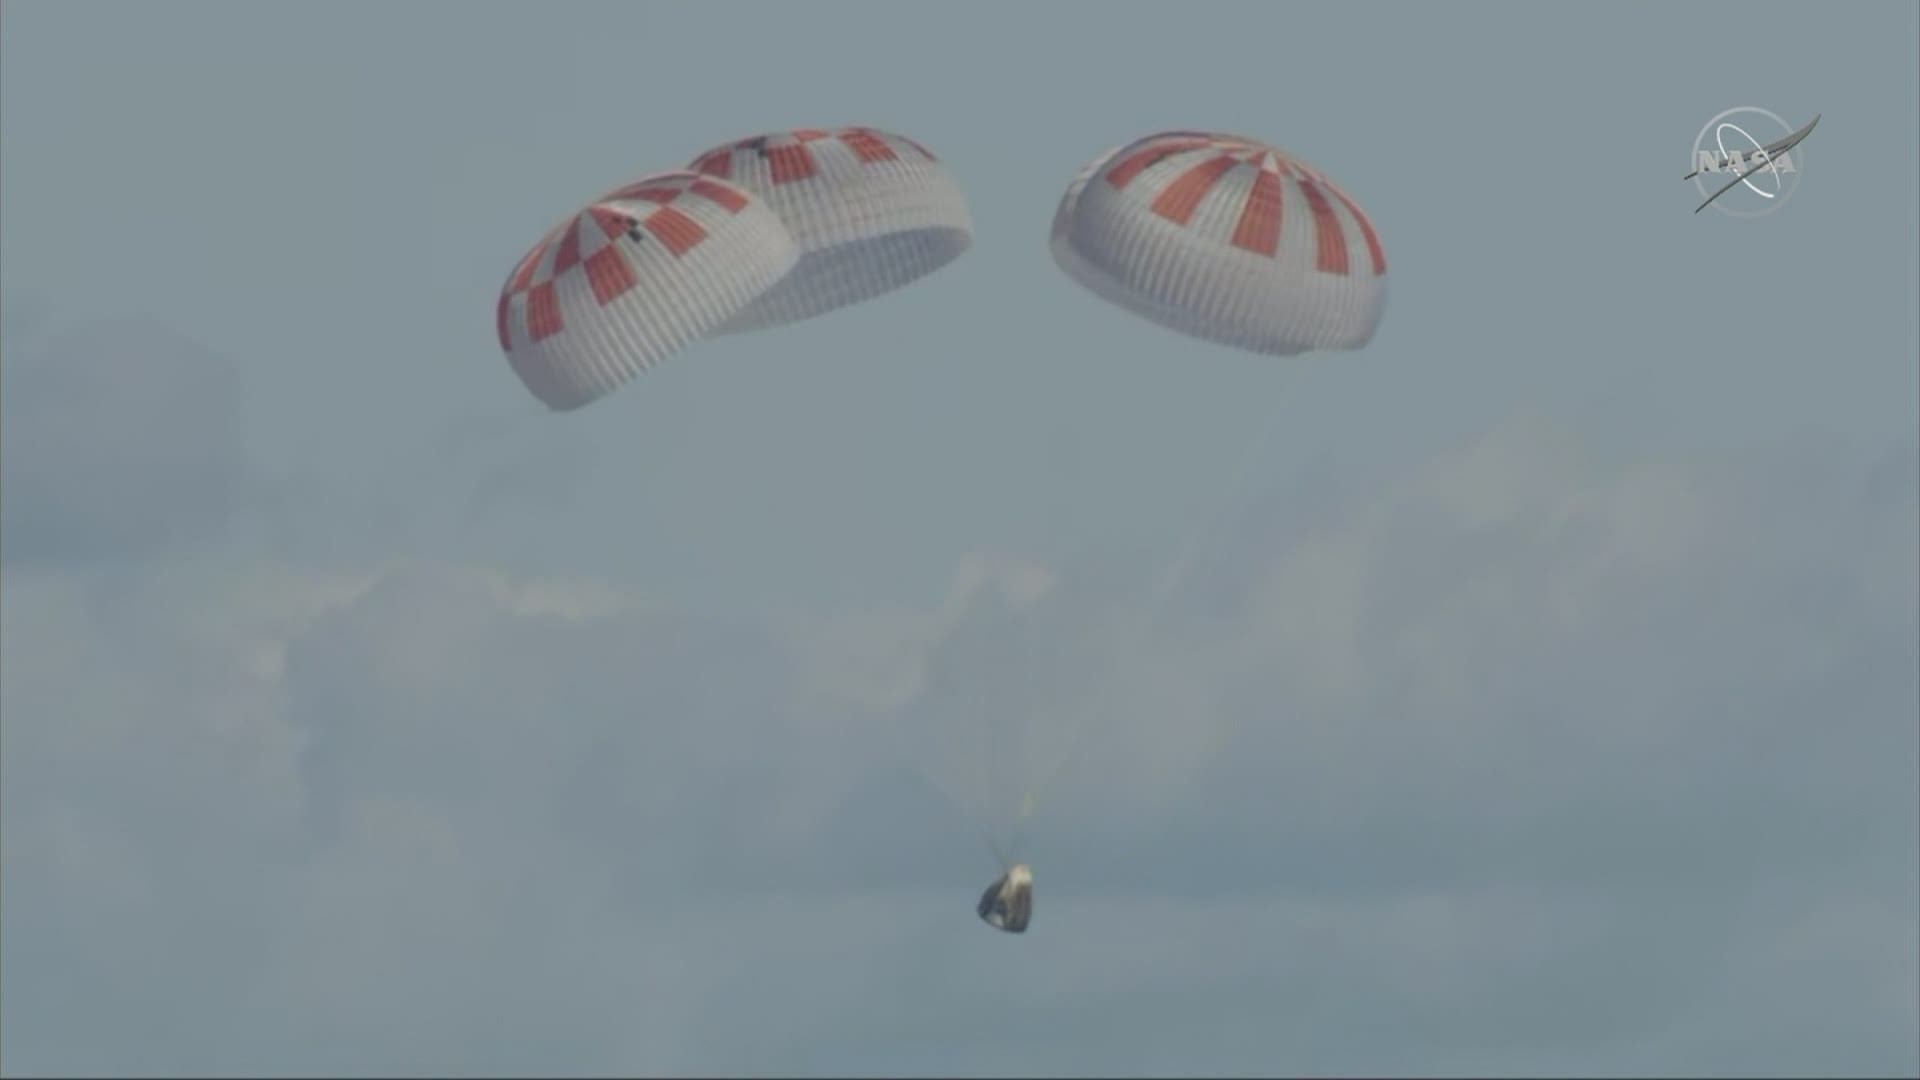 SpaceX's new crew capsule returned to Earth on Friday, ending its first test flight with an old-fashioned splashdown.